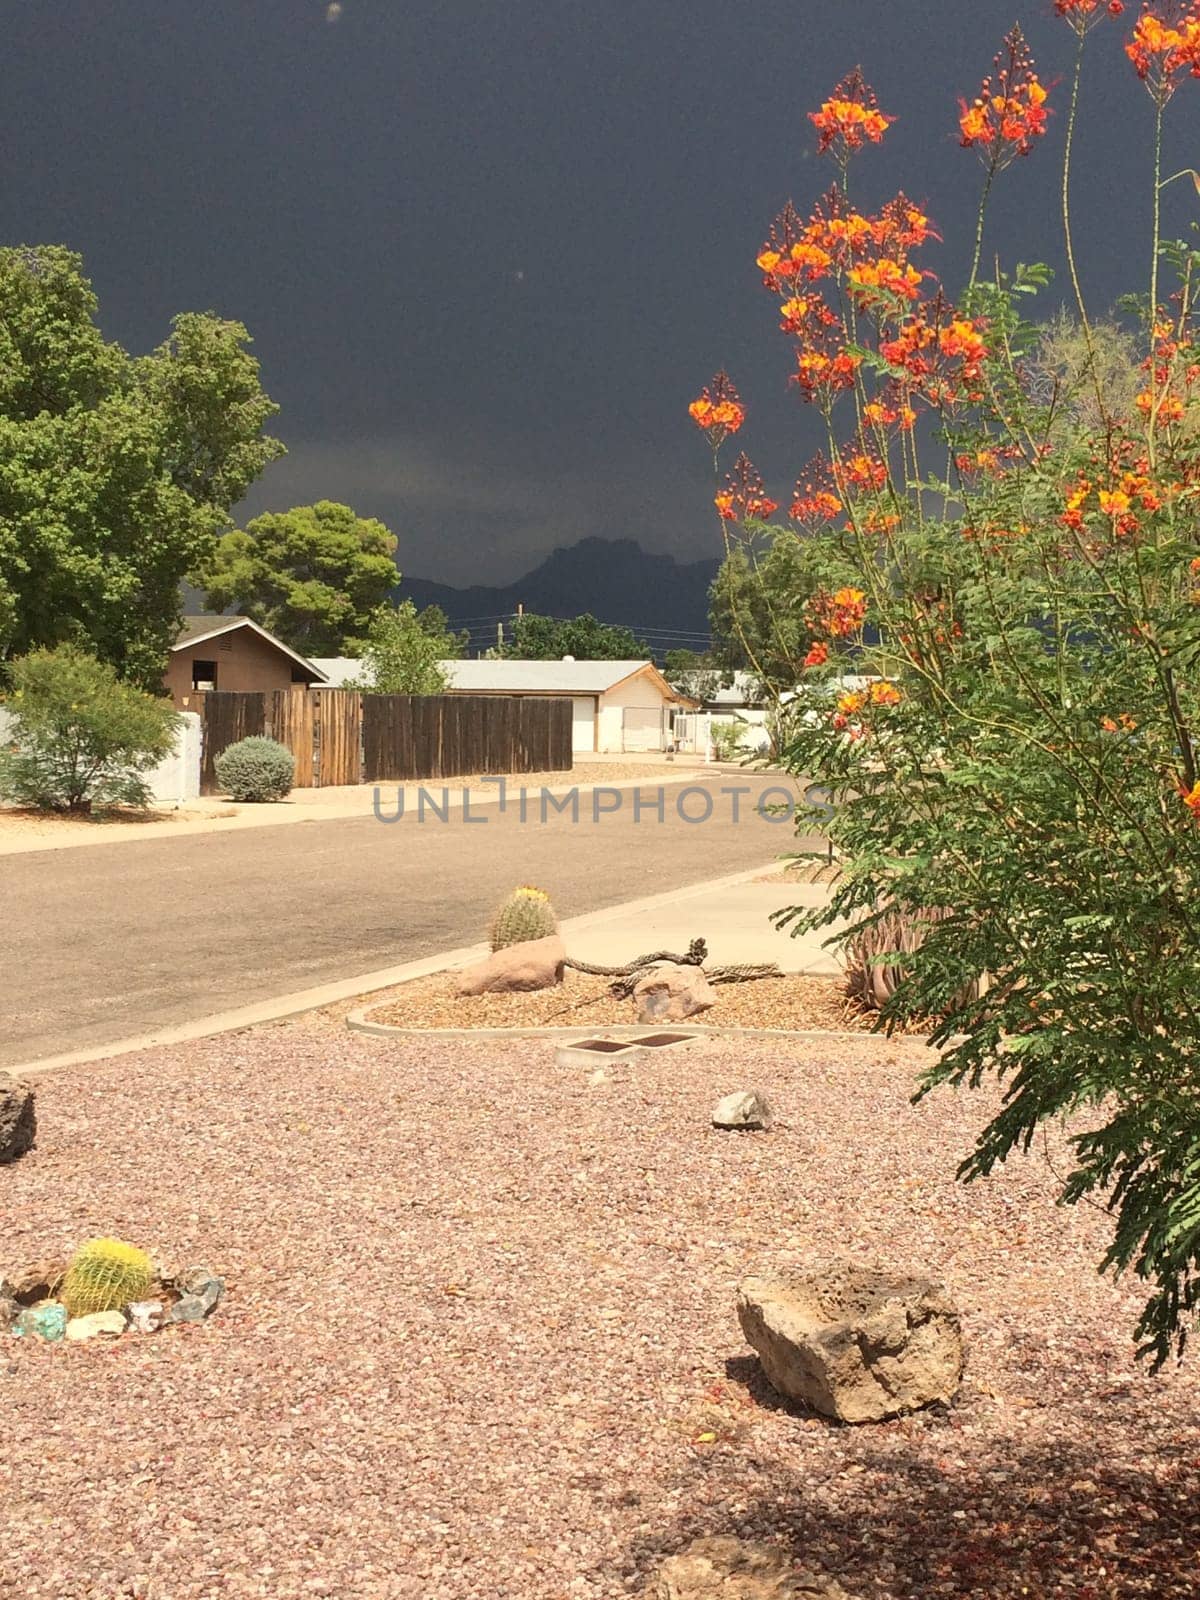 Sunny and Stormy, Summer Storm in Apache Junction, Arizona Neighborhood. High quality photo